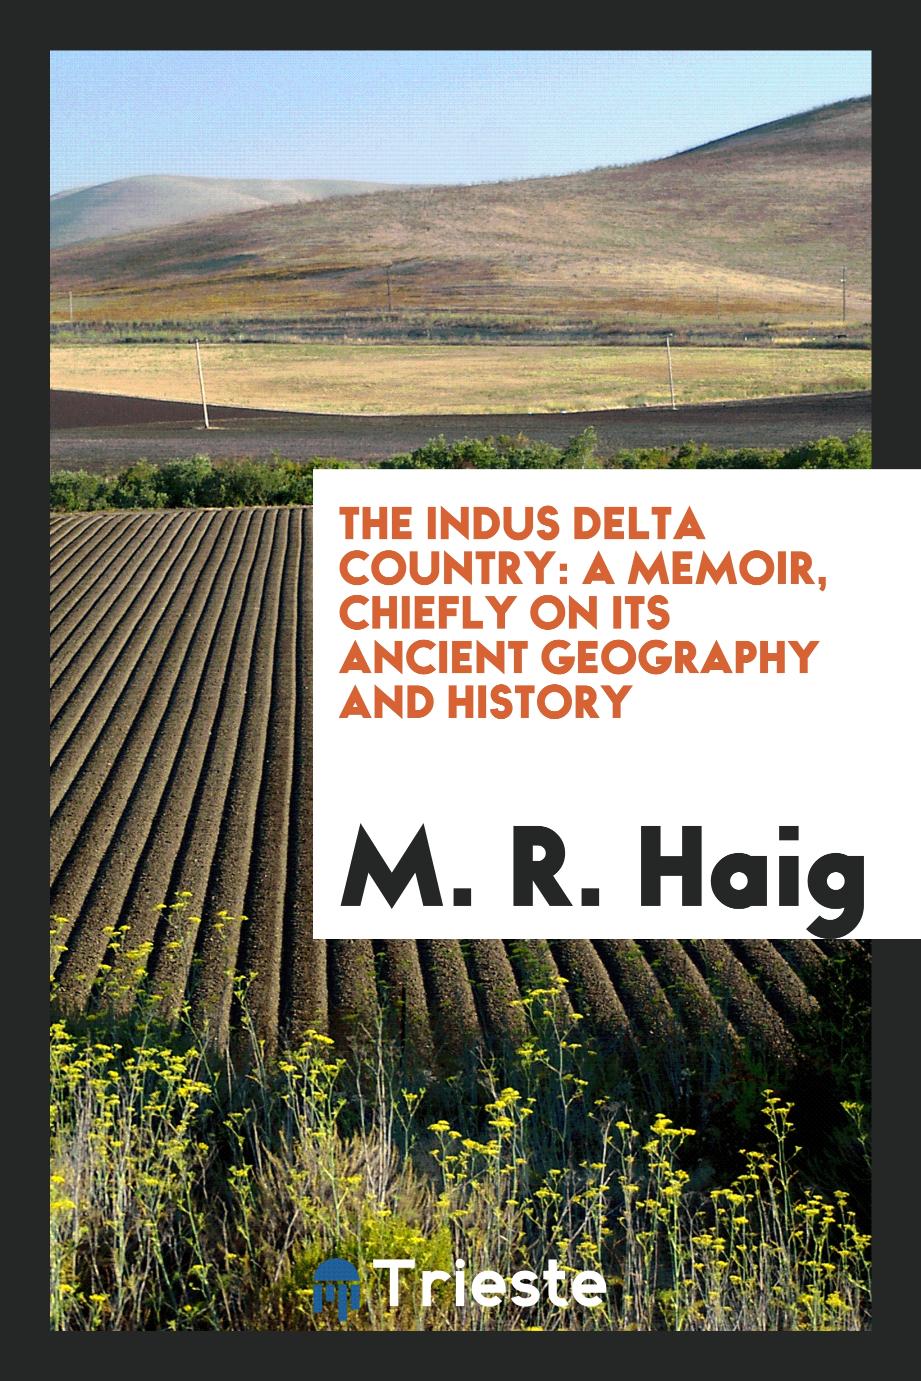 The Indus Delta Country: A Memoir, Chiefly on Its Ancient Geography and History